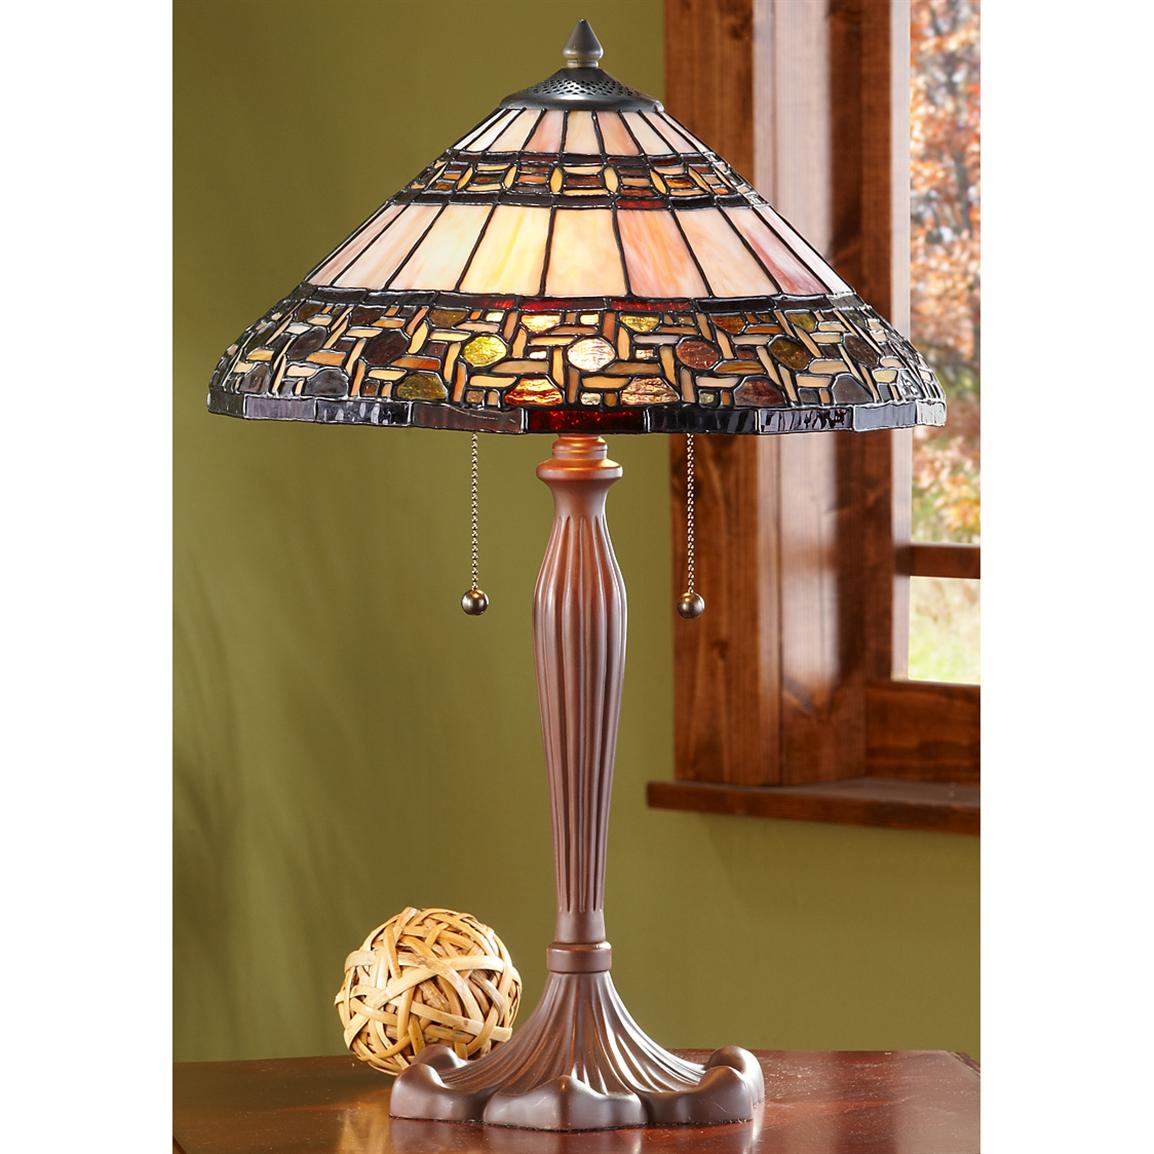 Tiffany - style Table Lamp - 209362, Lighting at Sportsman's Guide